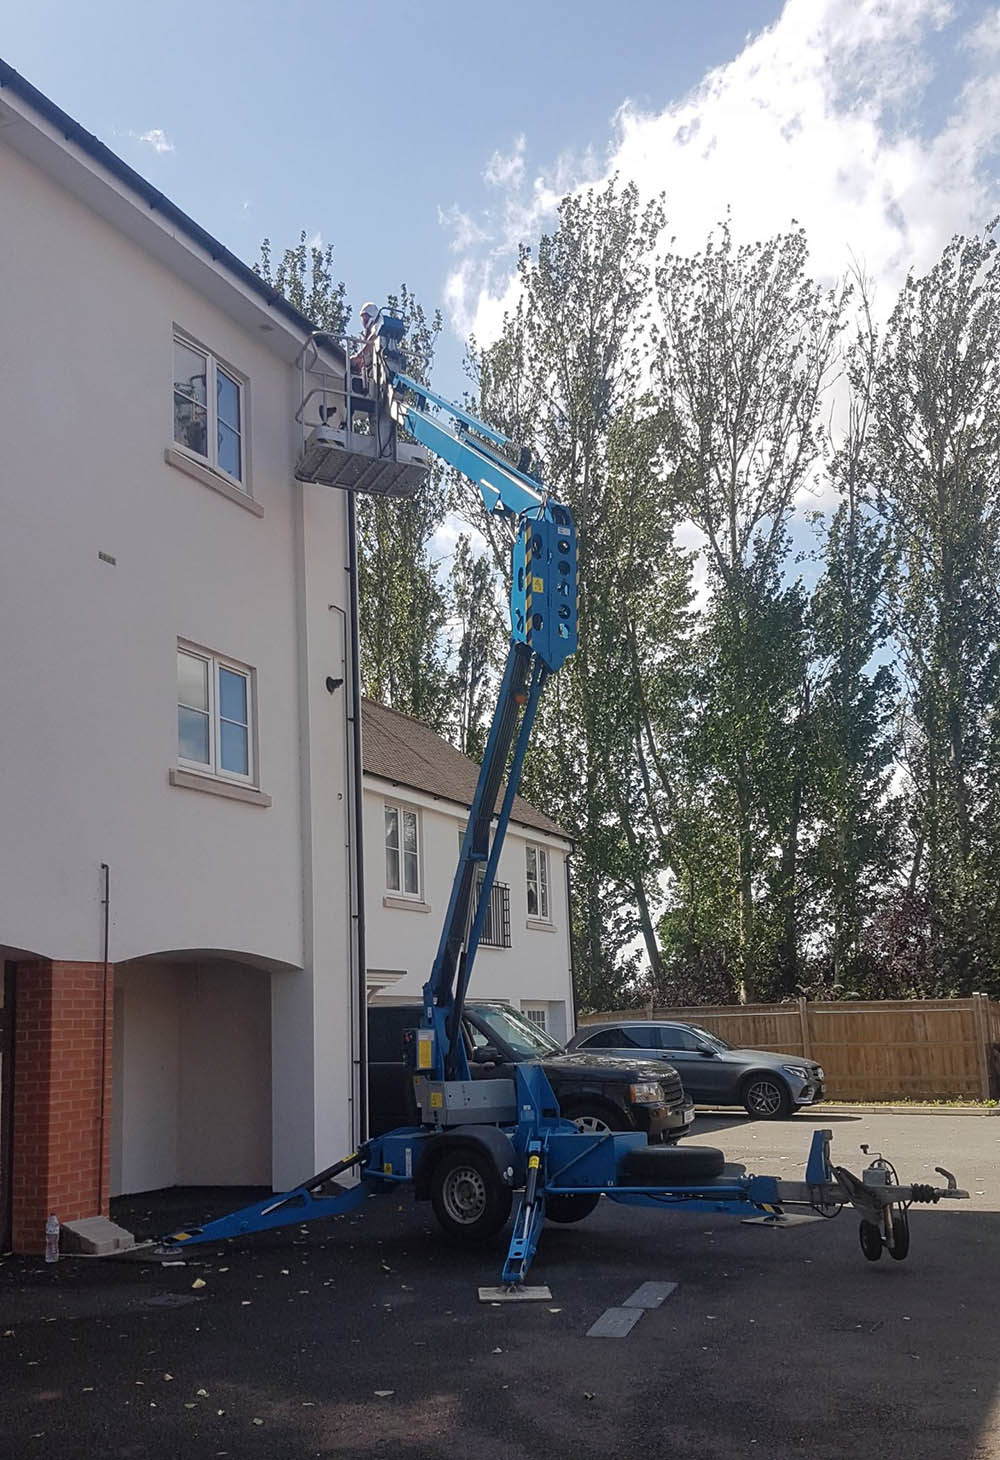 High Level Gutter Cleaning near me West Ealing